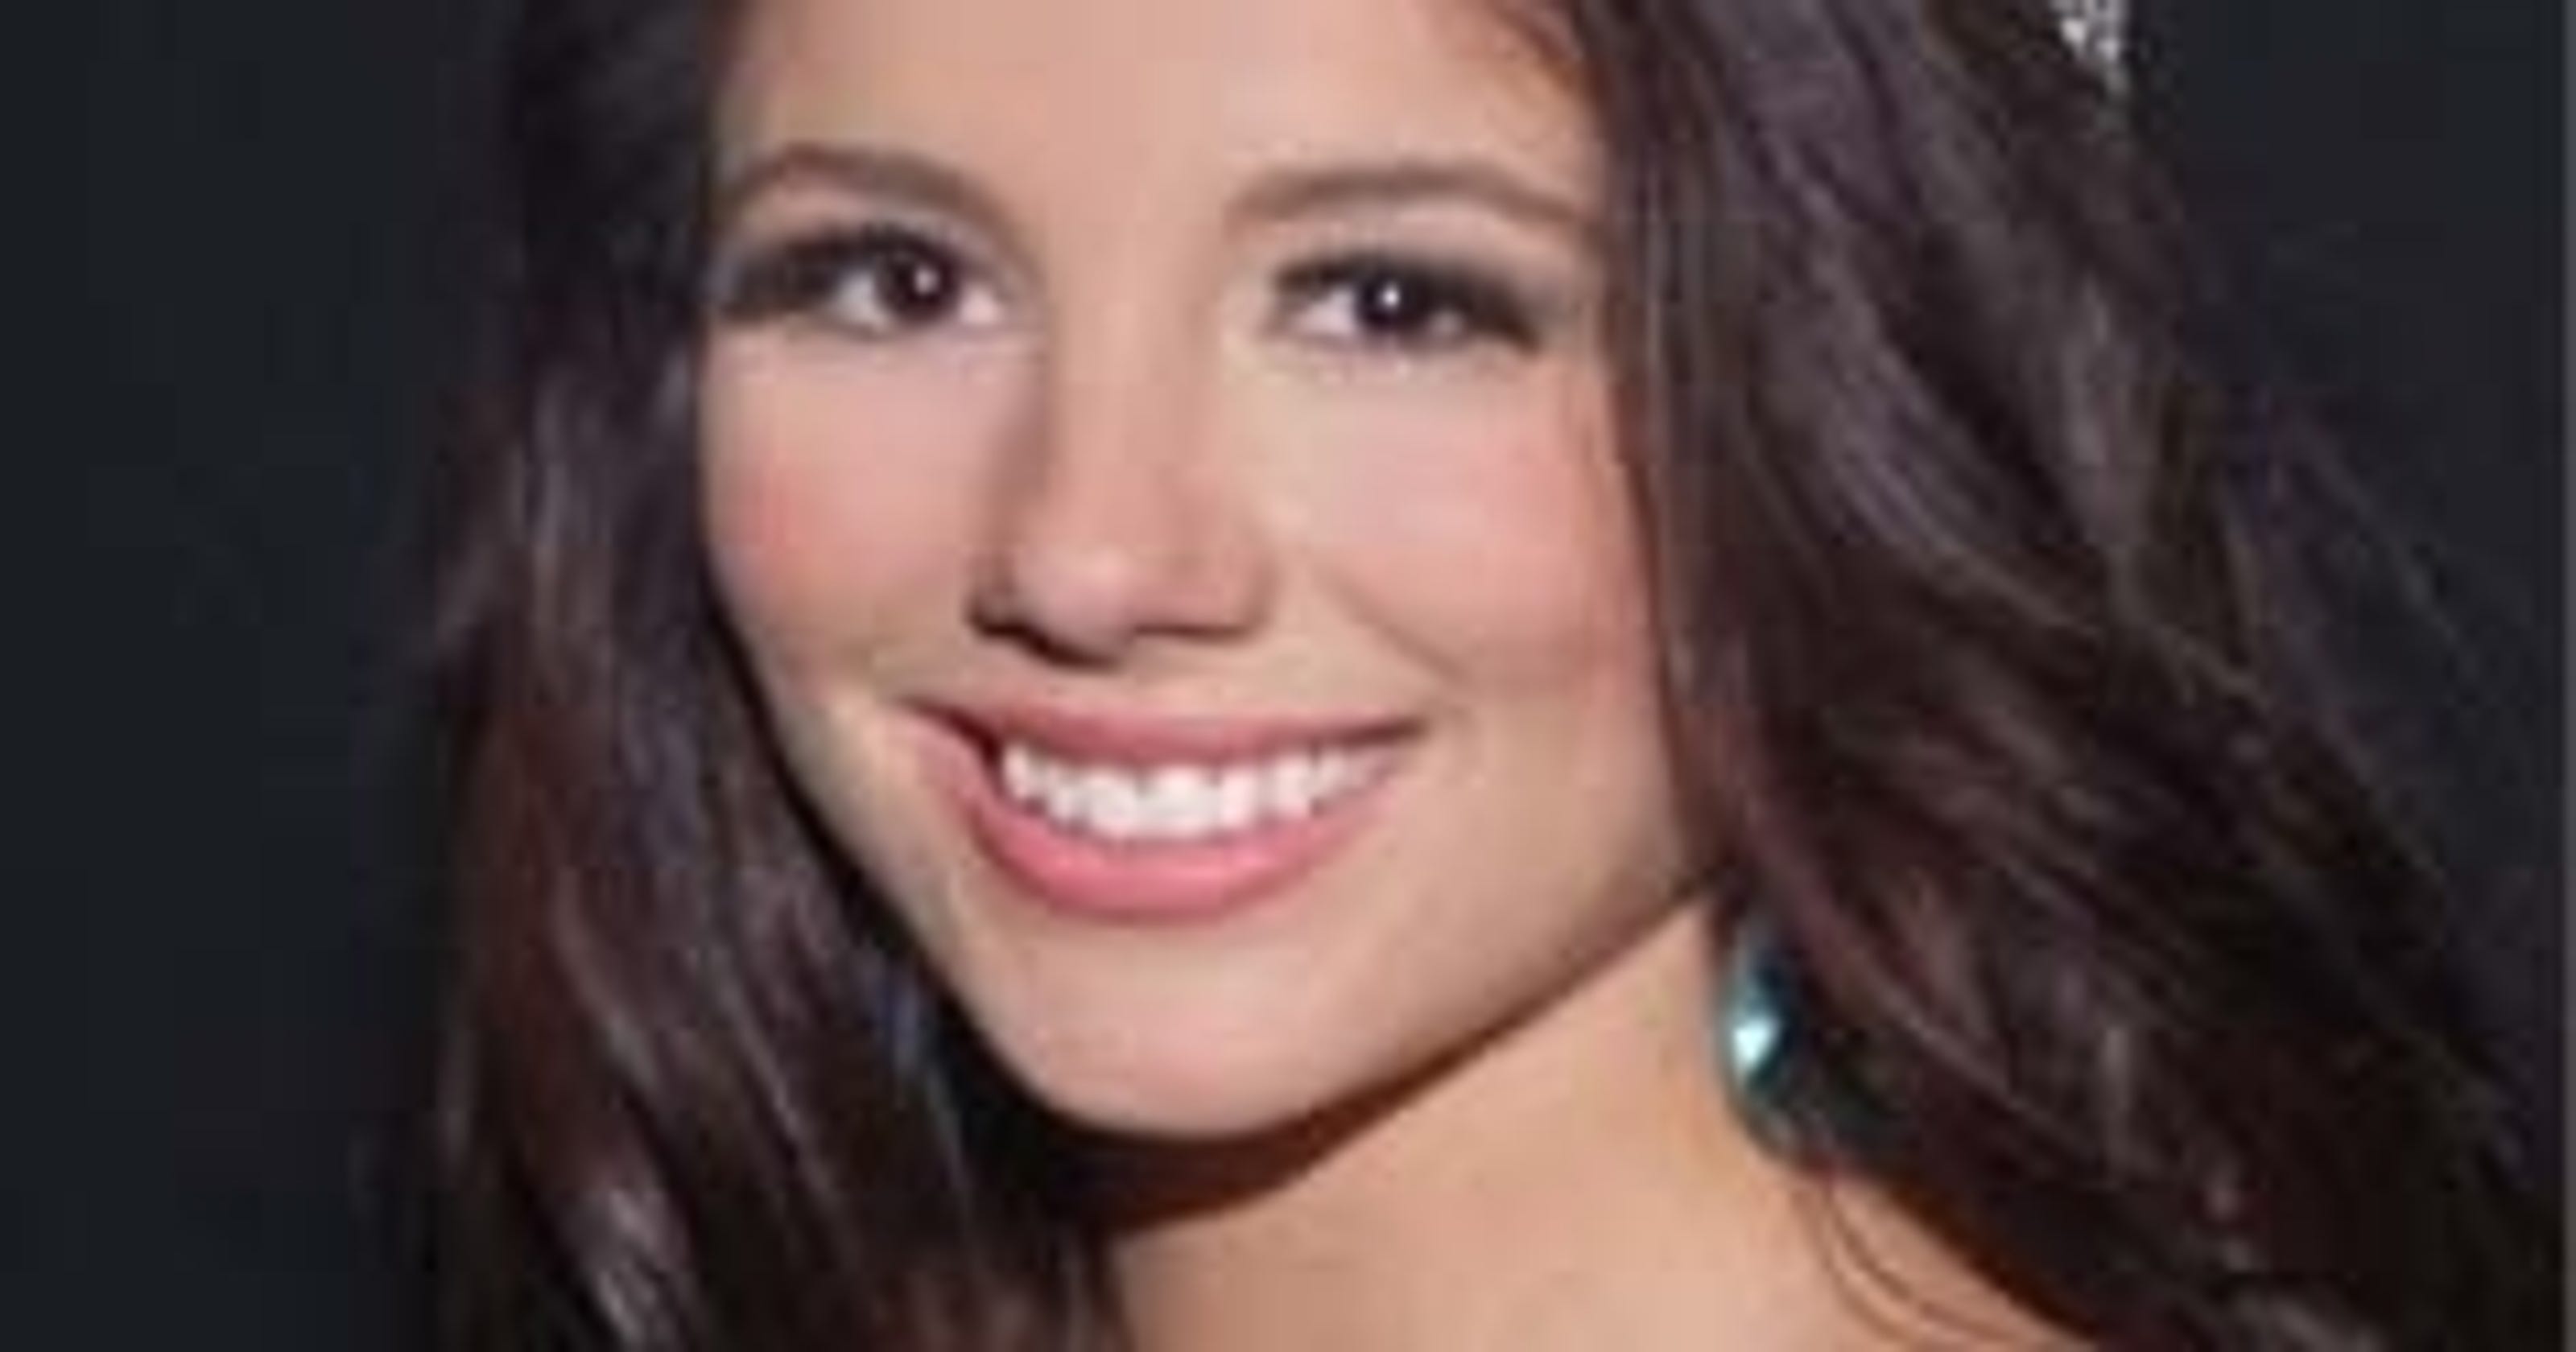 Miss Delaware Teen Usa Resigns After Sex Video Surfaces